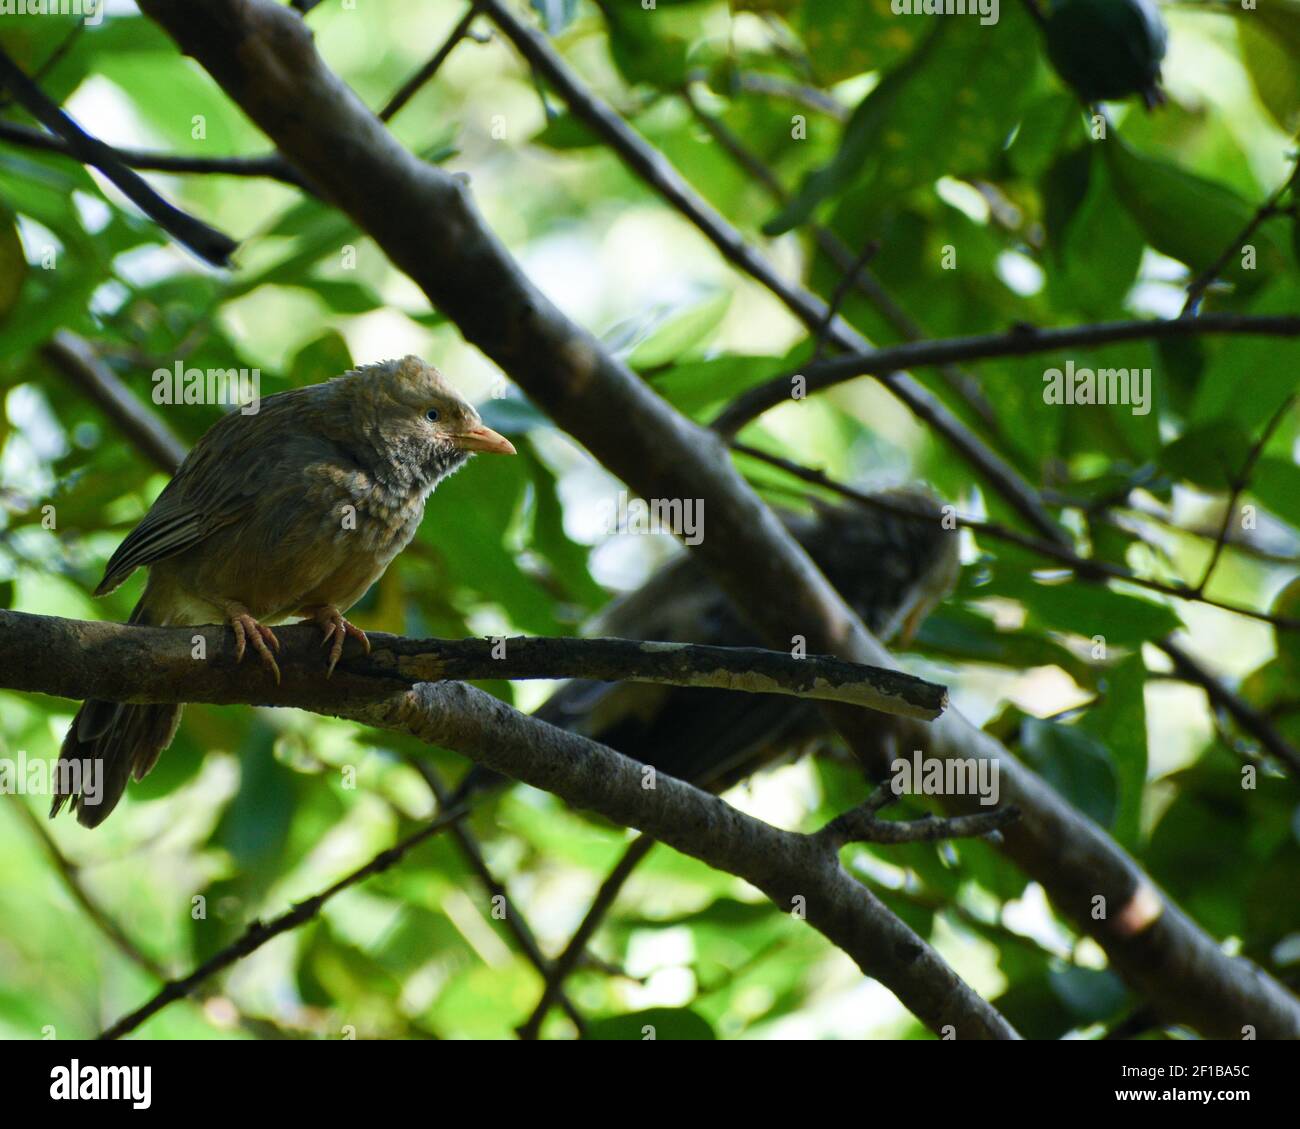 A close up of a jungle babbler sitting in a tree branch Stock Photo